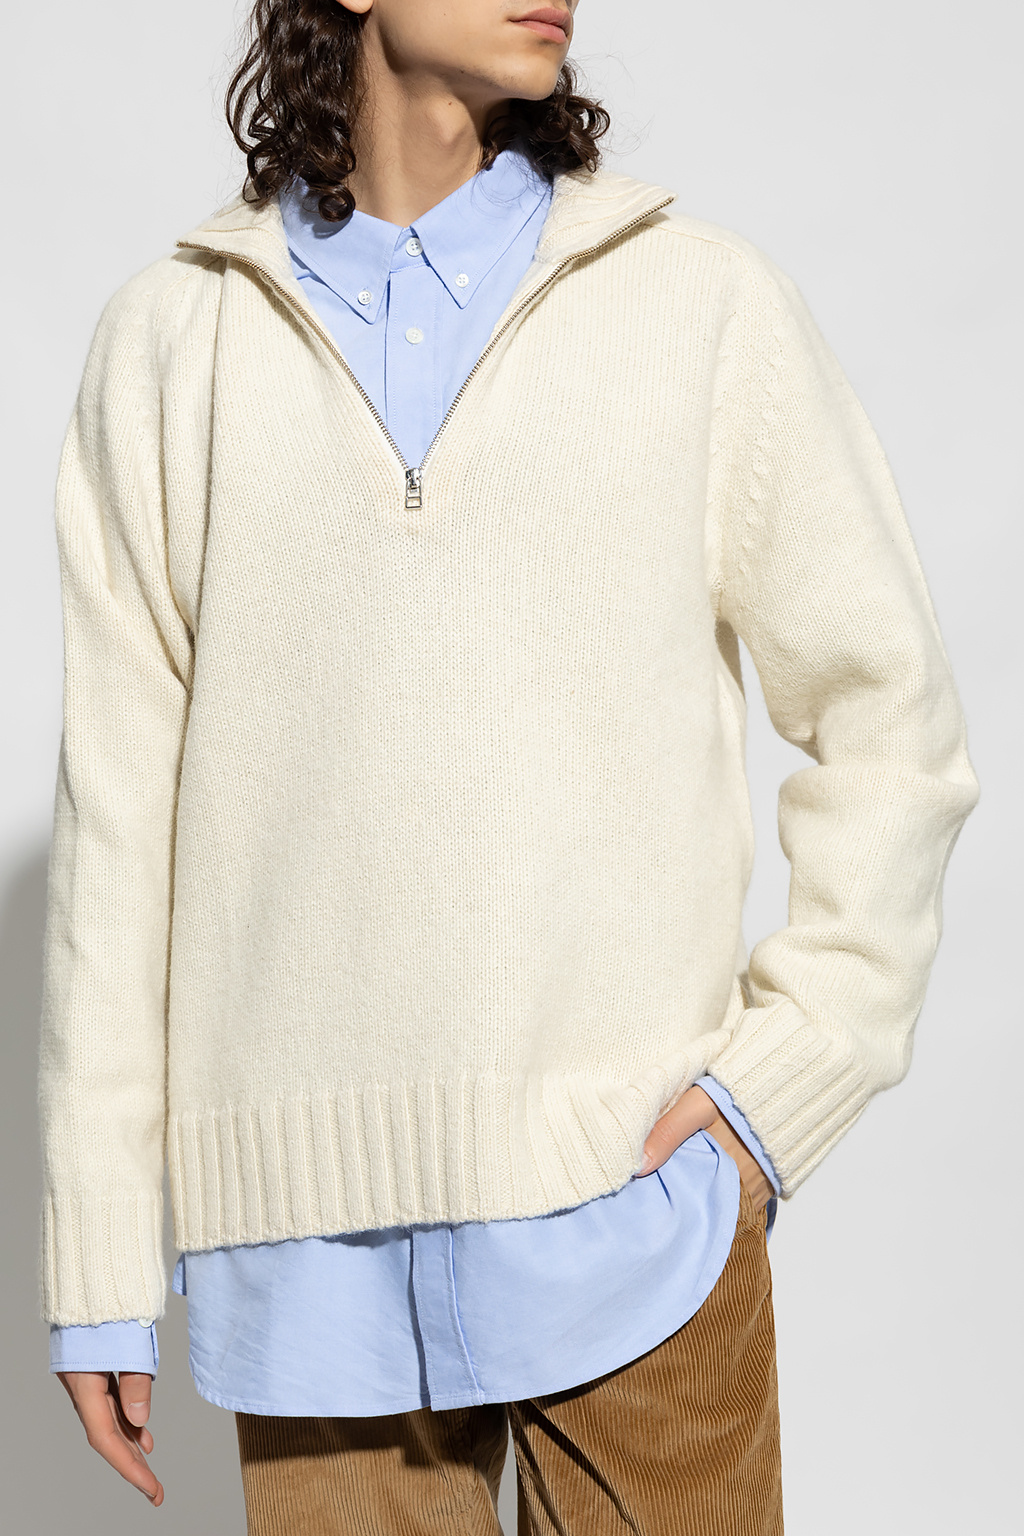 Norse Projects ‘Bruno’ Jackets sweater